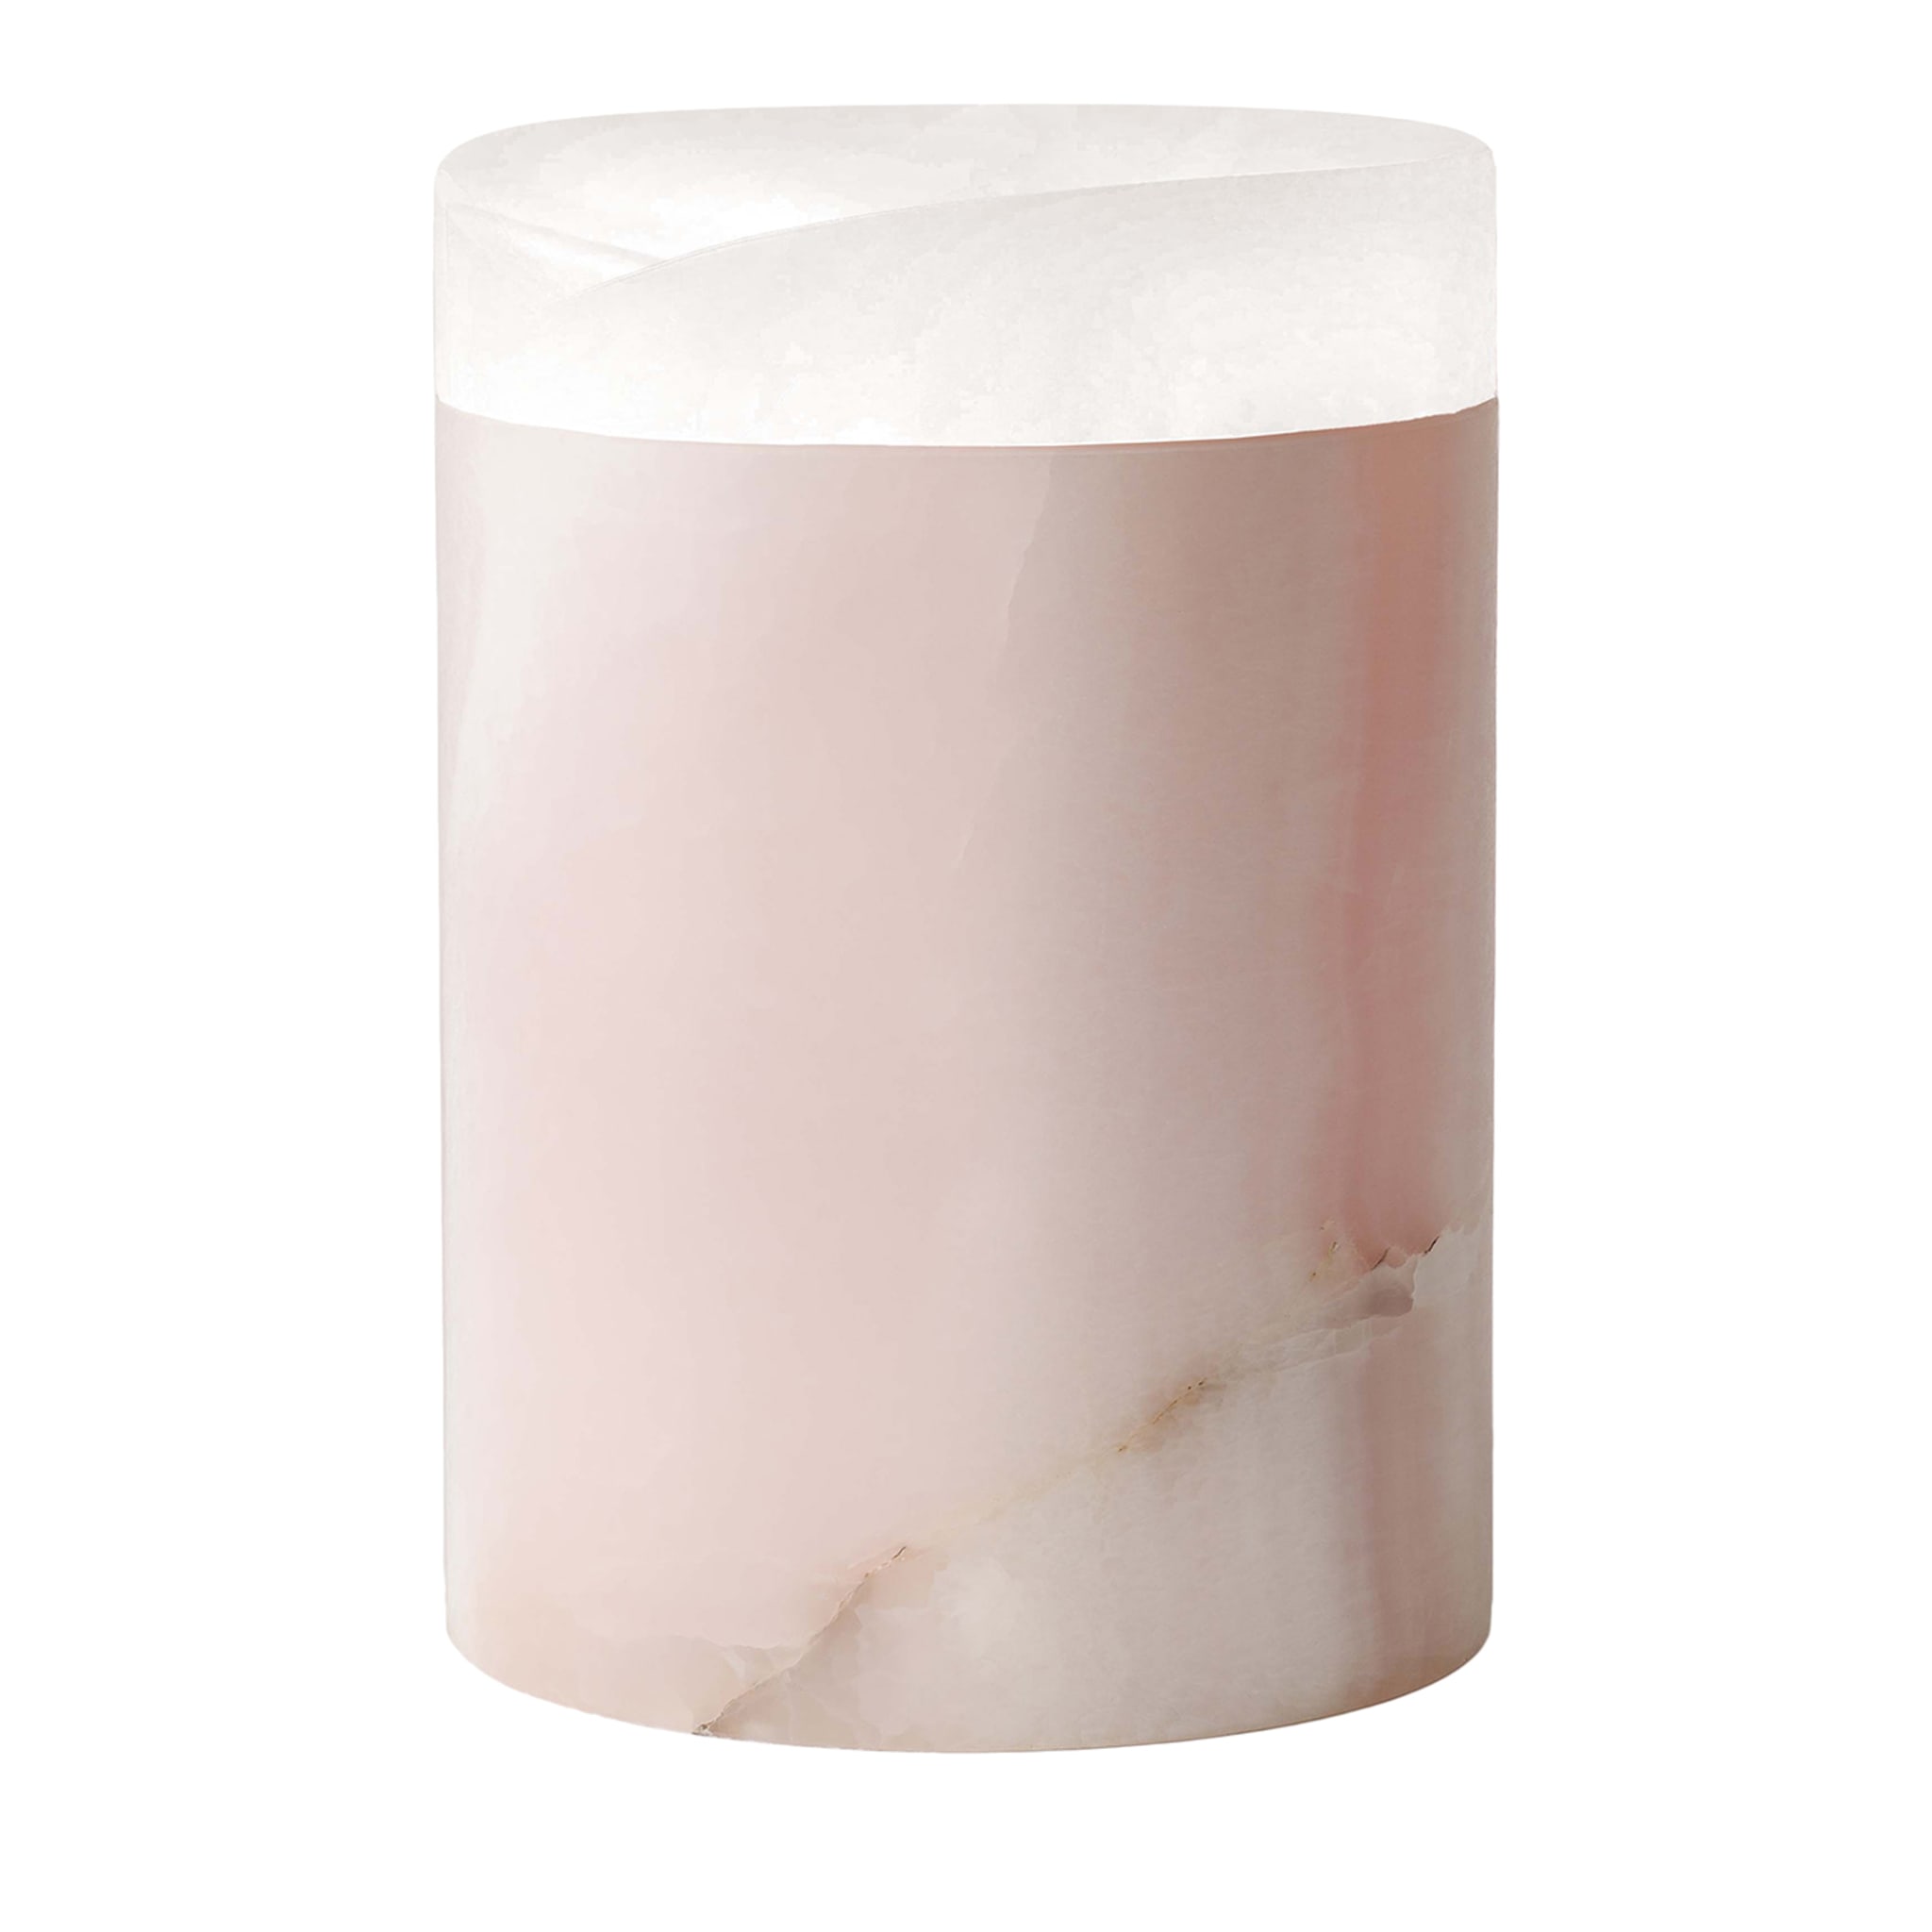 Vase Here and Now blanc et rose onyx #2 - Vue principale